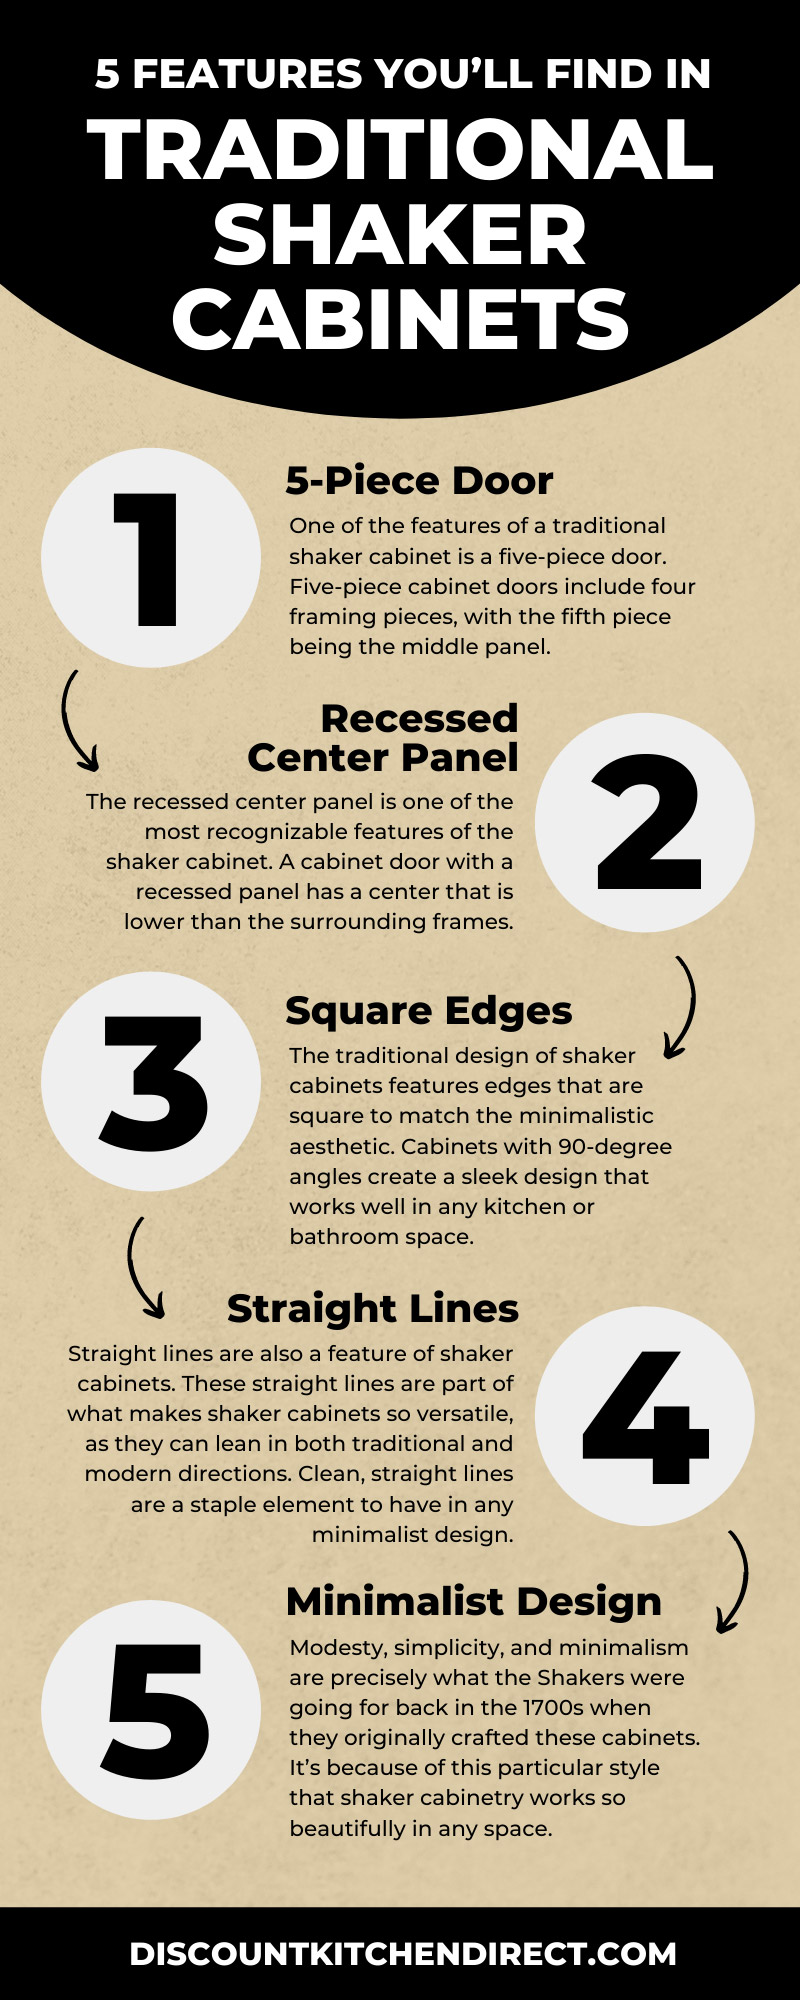 5 Features You’ll Find in Traditional Shaker Cabinets